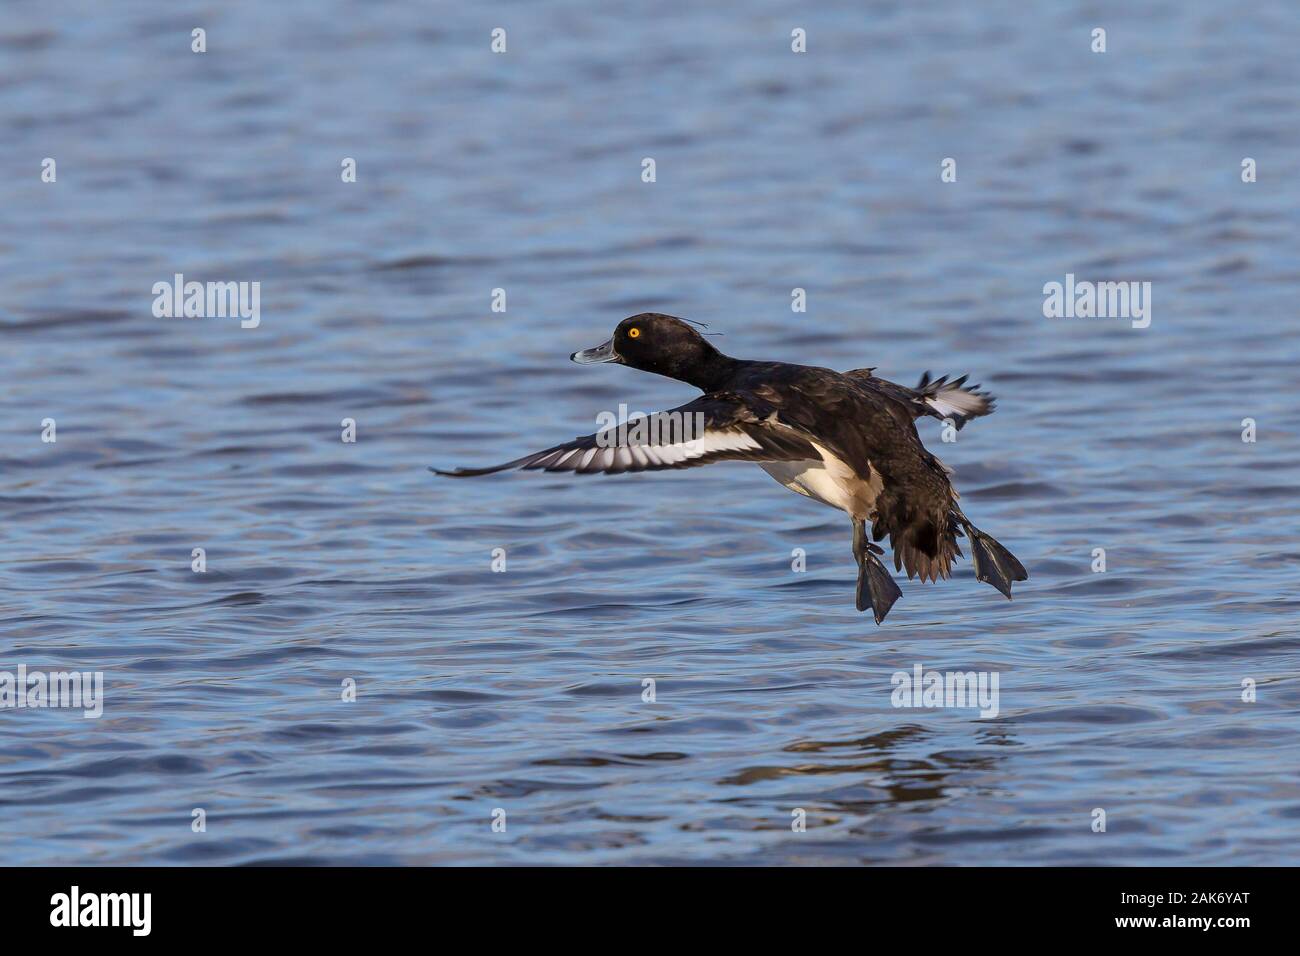 Rear view close up sunlit, male UK tufted duck (Aythya fuligula) isolated in midair flight. Tufted drake flying over water ready to land, wings spread. Stock Photo